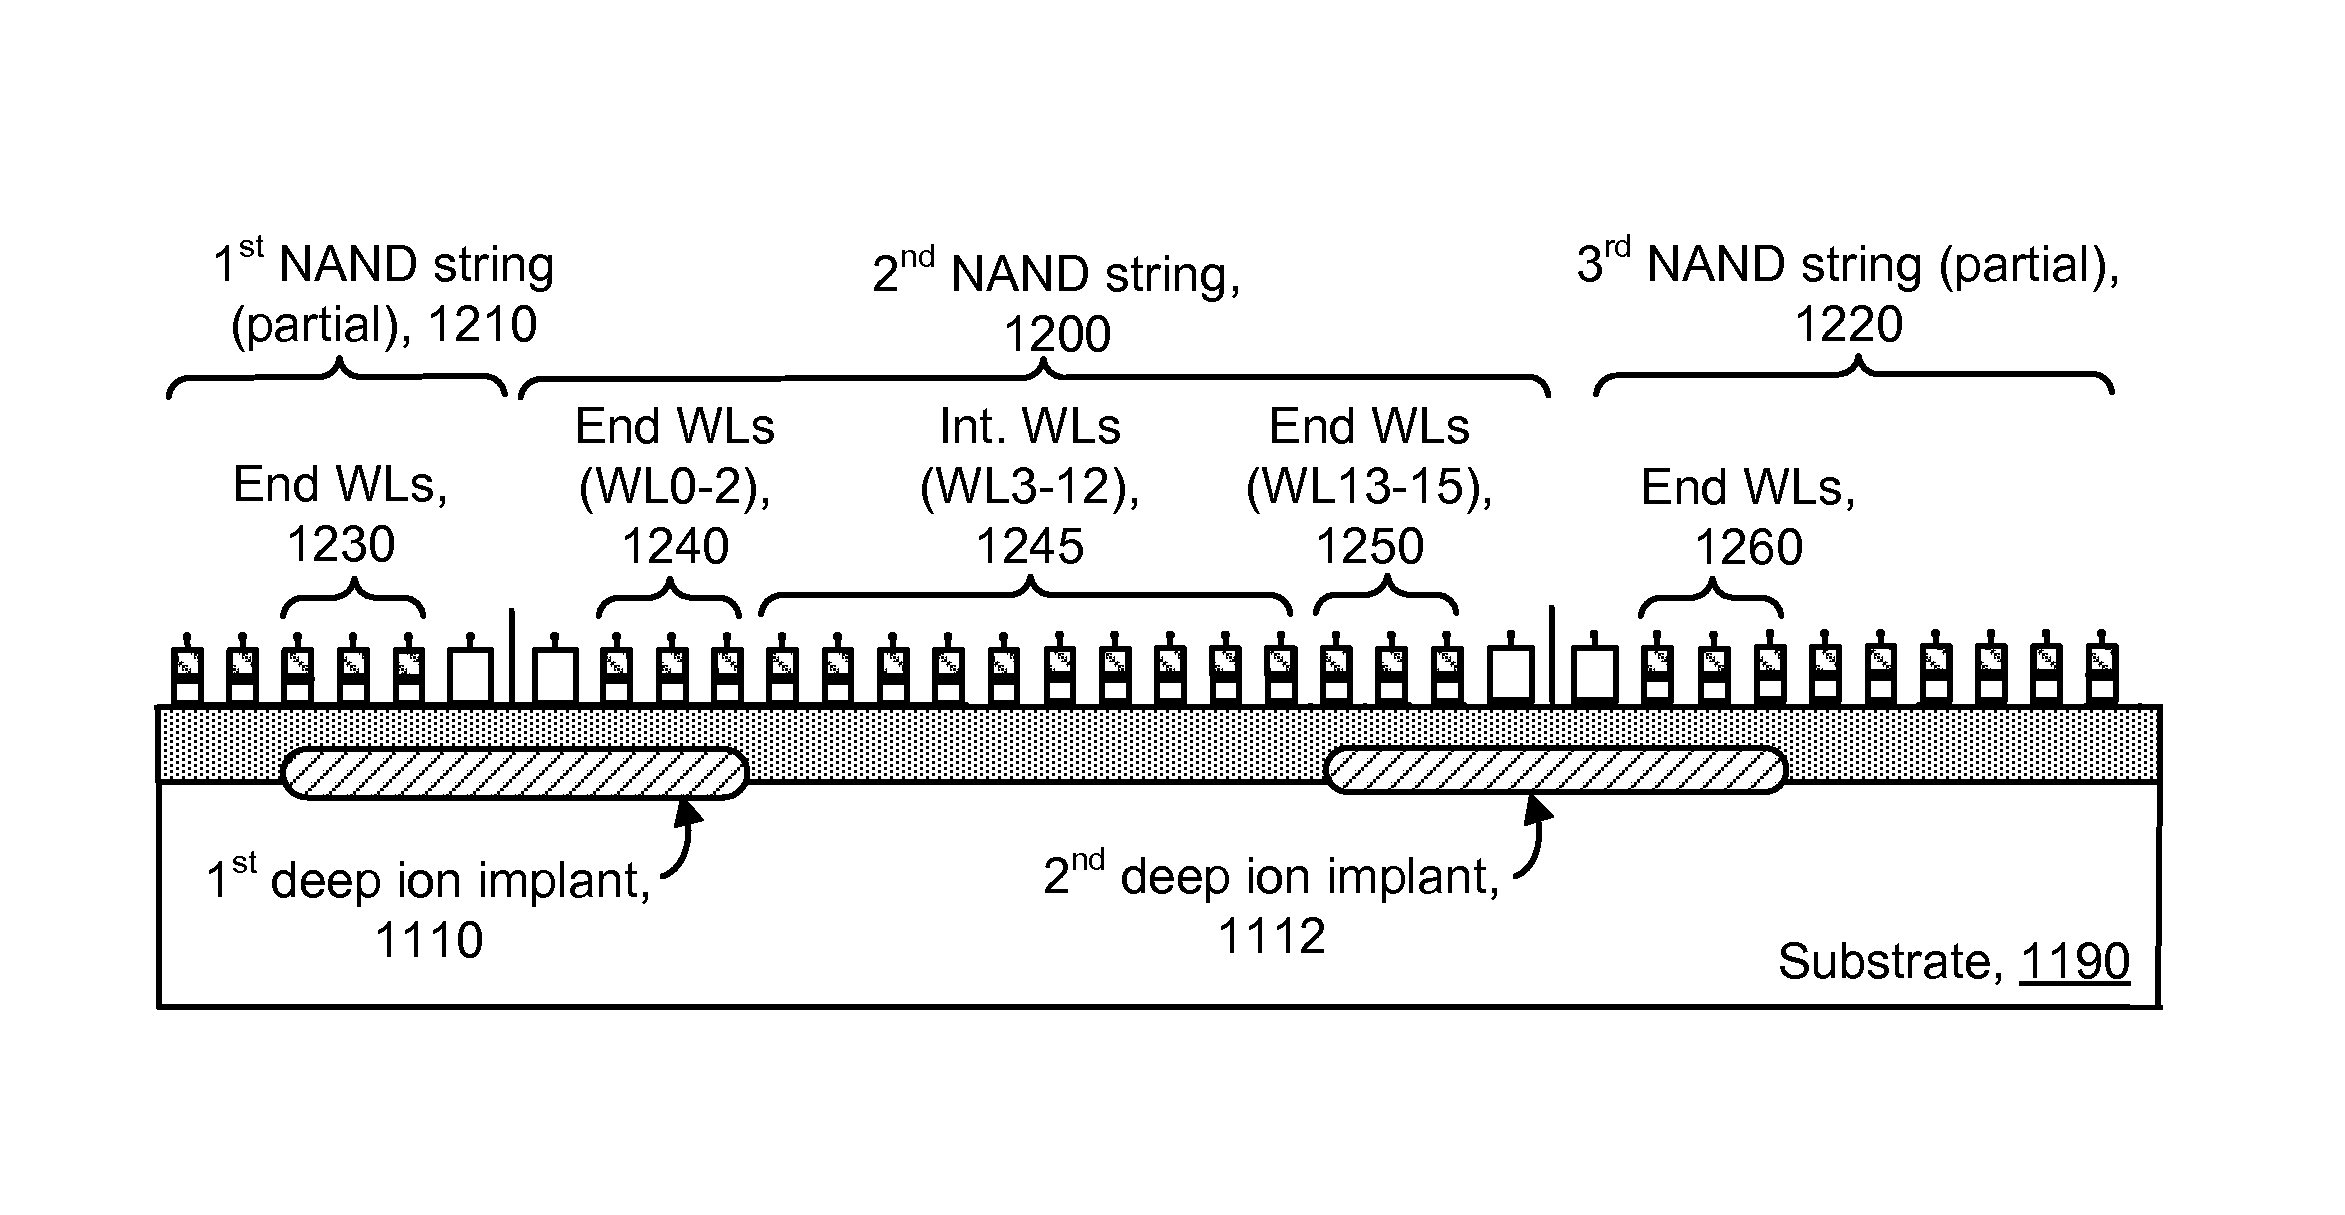 Non-volatile memory with local boosting control implant